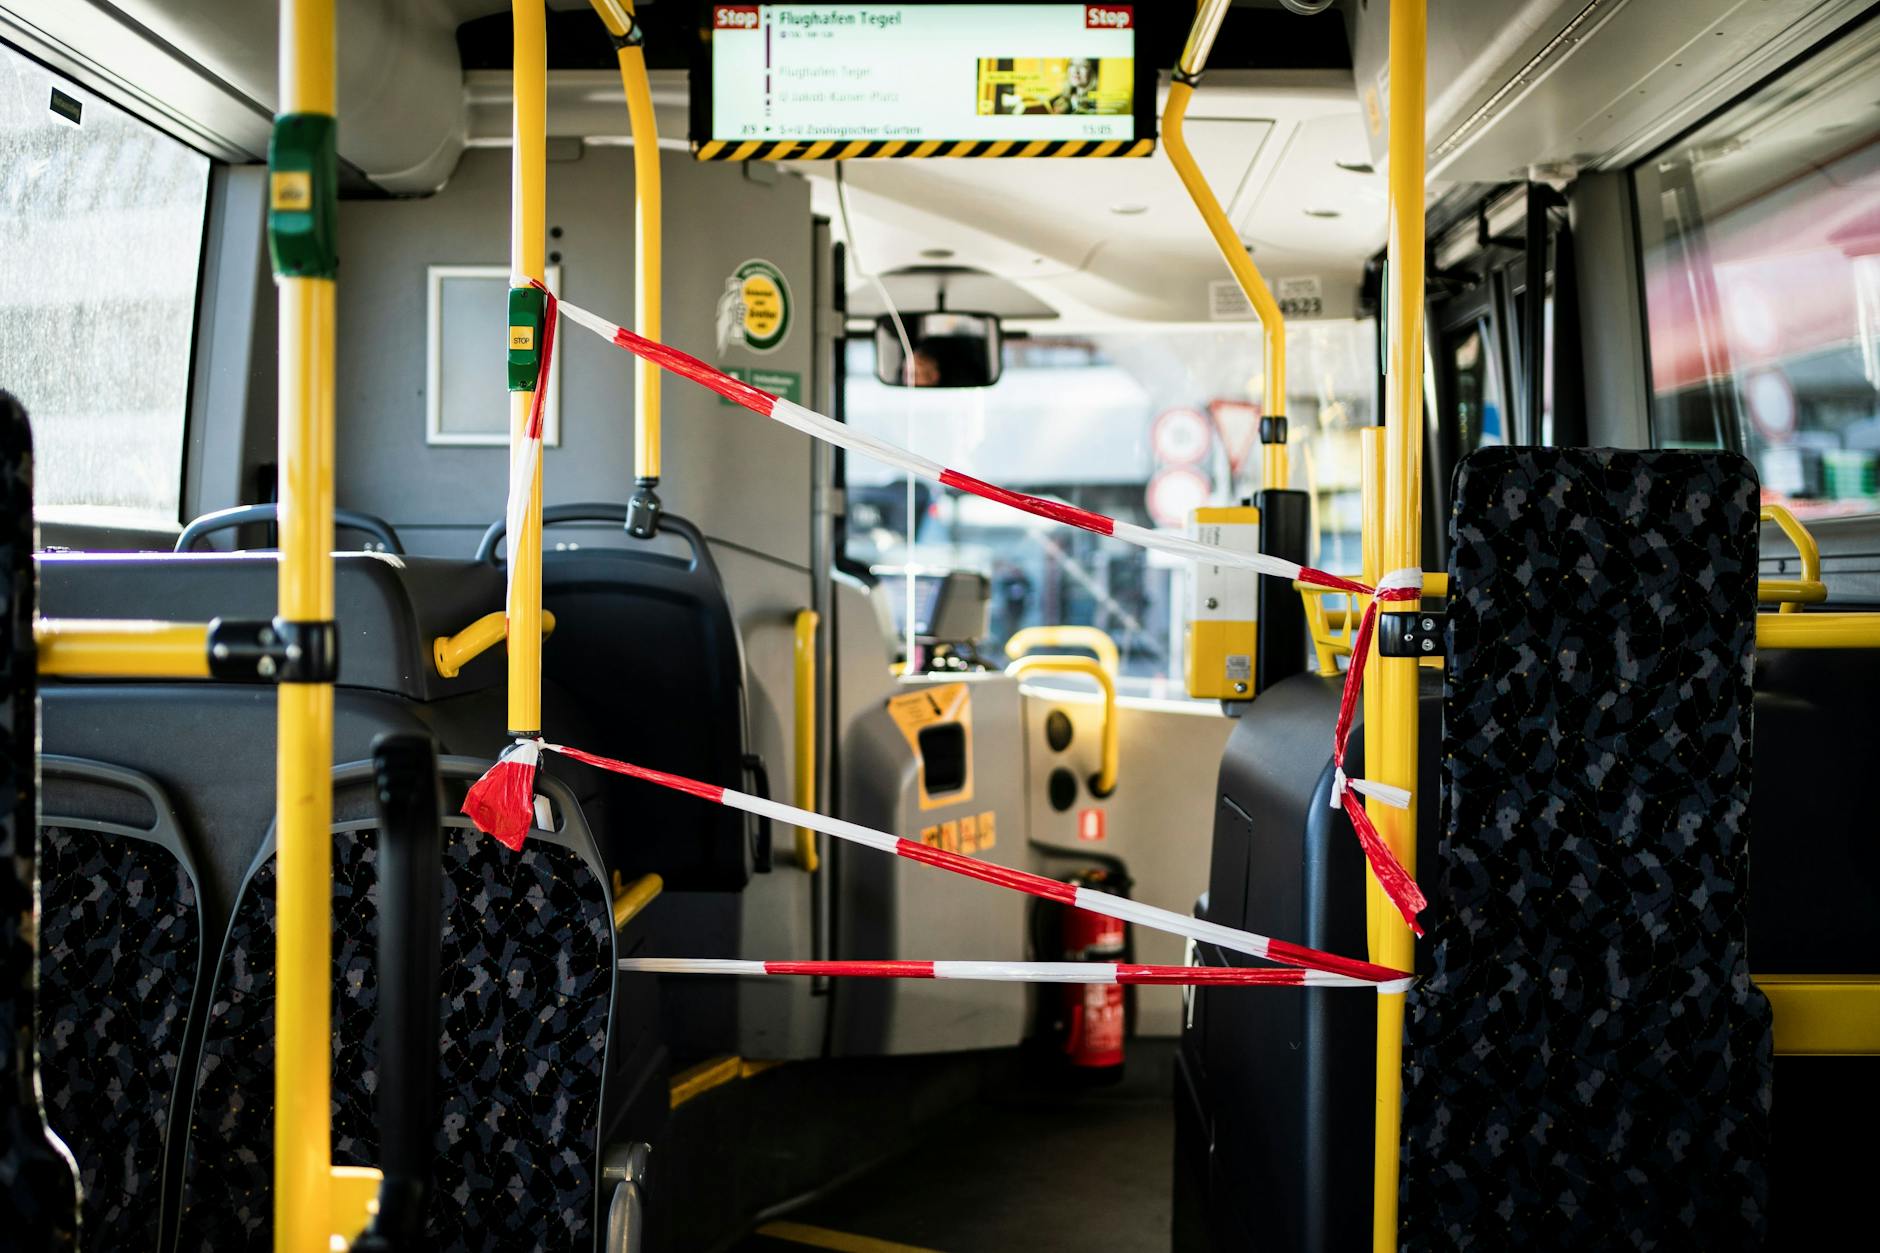 But locked driver's area in a BVG bus.  Berlin, Germany, 03/22/2020.